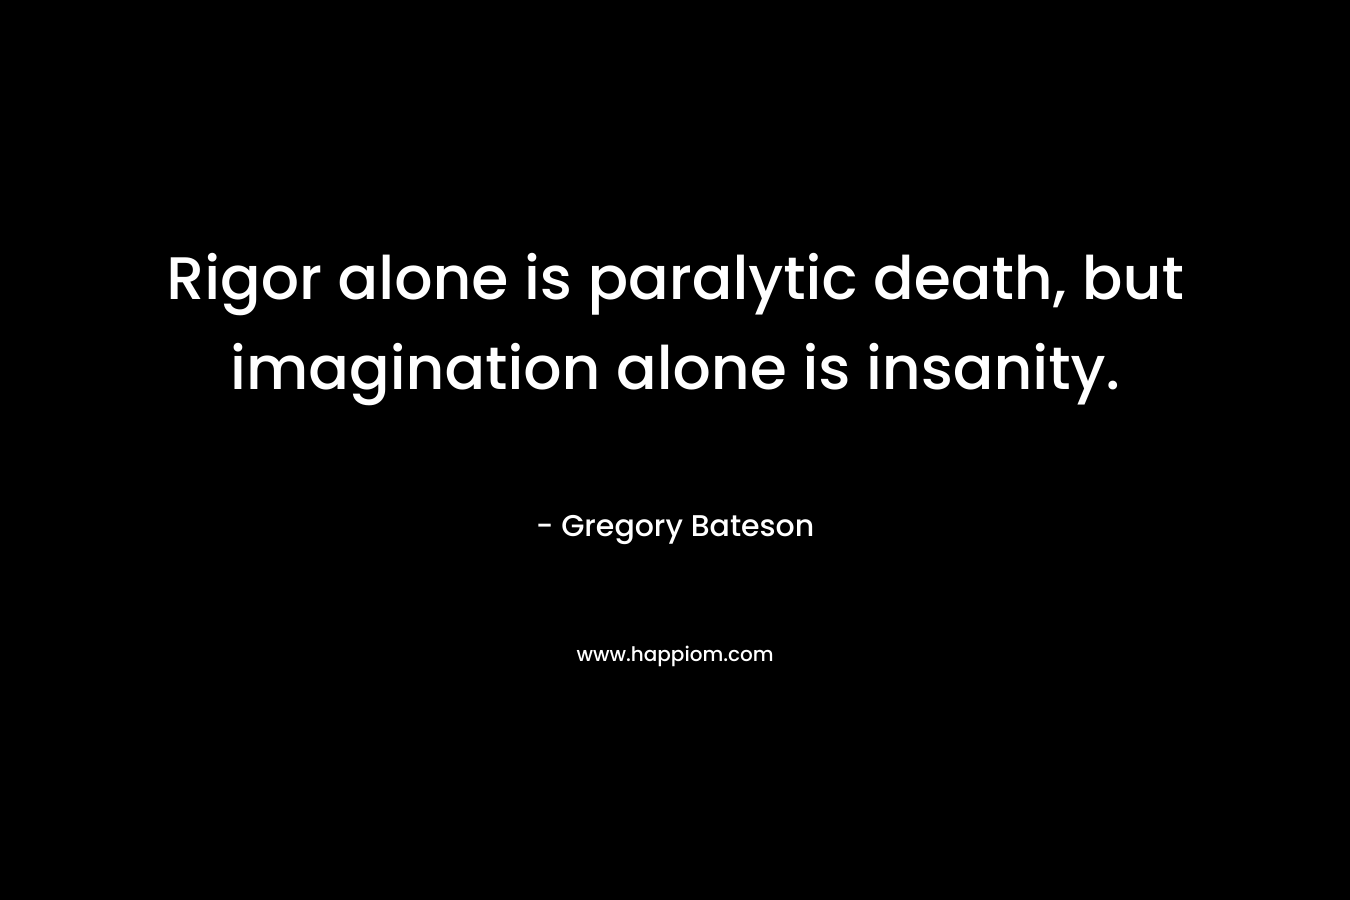 Rigor alone is paralytic death, but imagination alone is insanity.